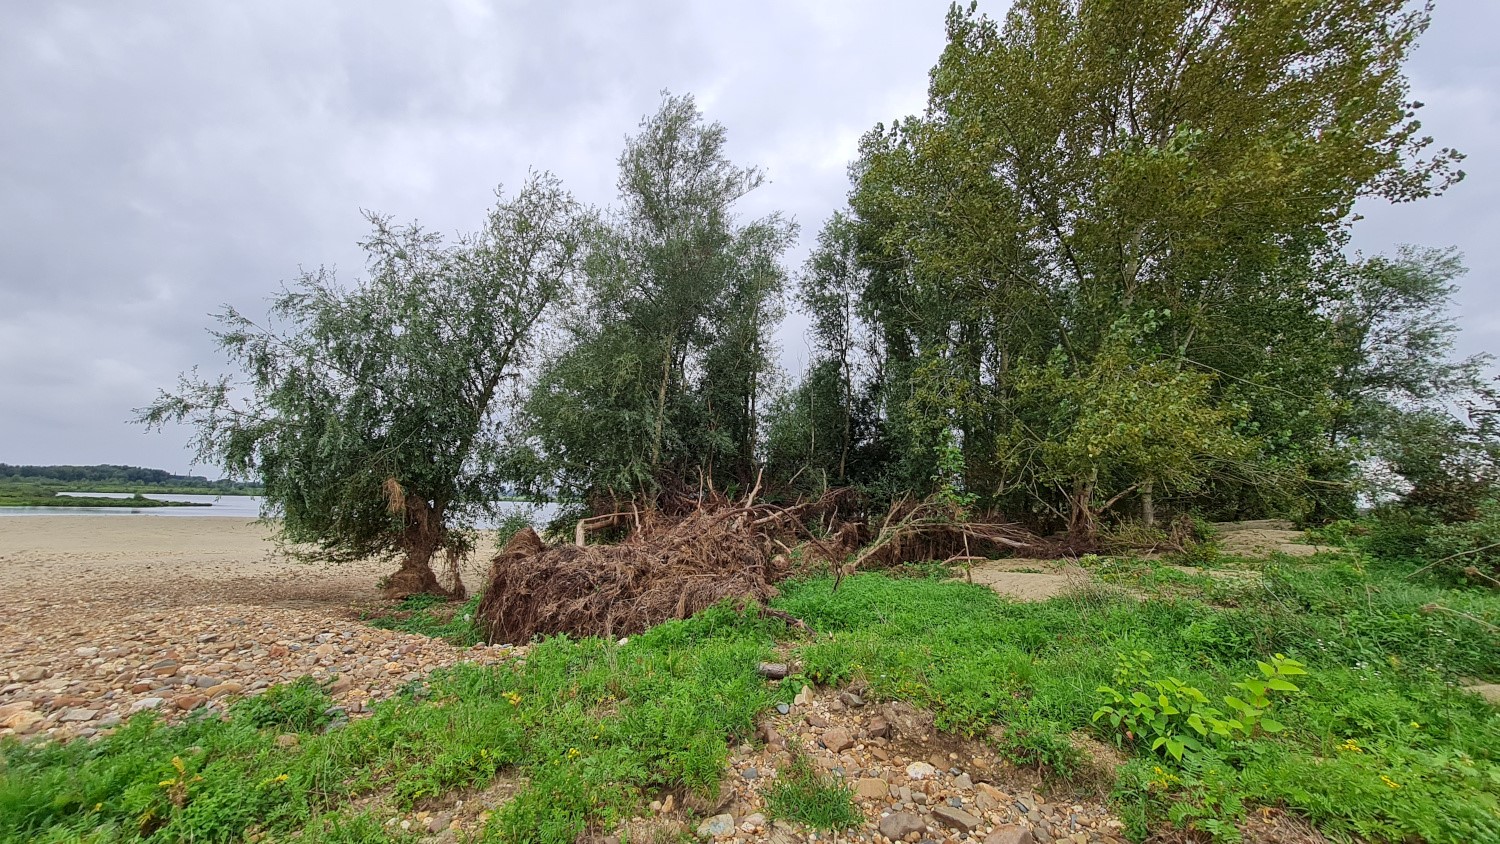 The Meuse two months after the July 2021 floods: cracked trees and large-scale deposits of sand and gravel (photo INBO)